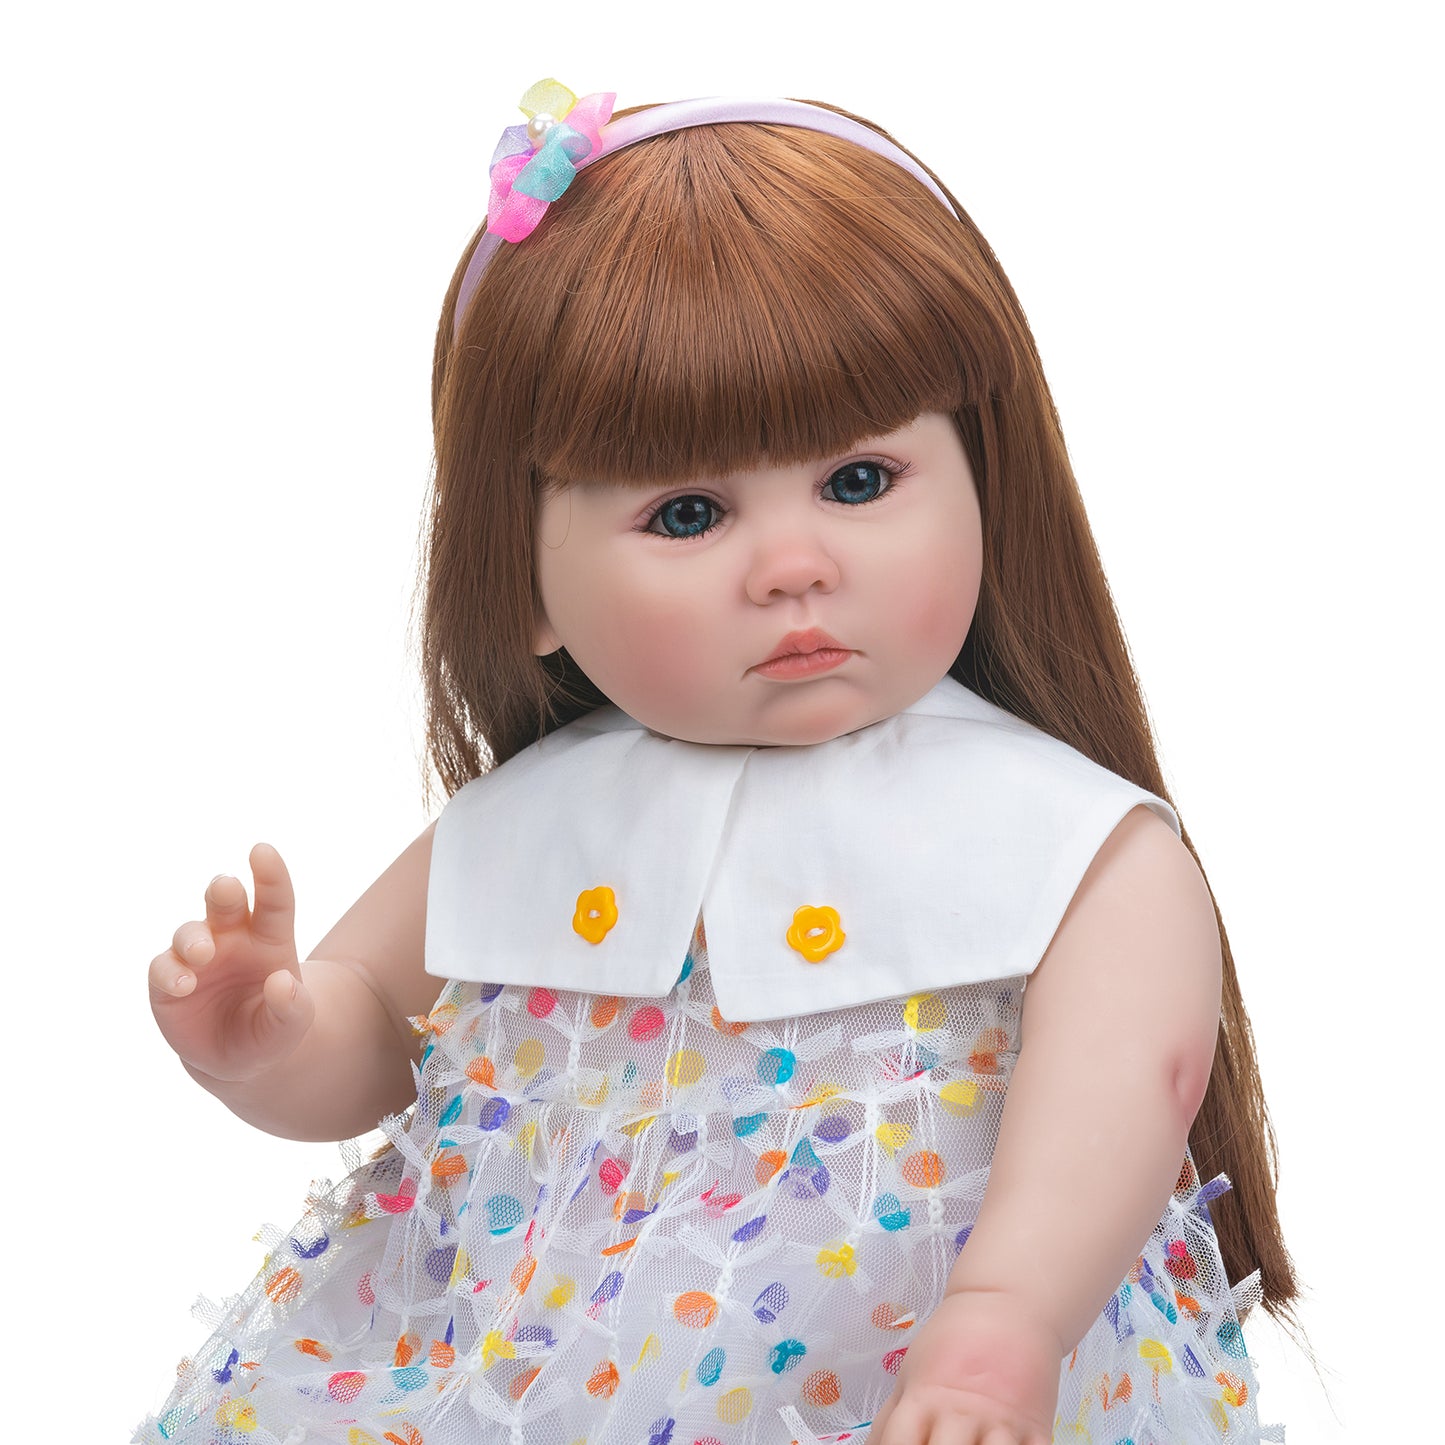 Lifelike Reborn Baby Dolls That look Real Toddler Princess Girls Long Red hair 60CM Soft Cuddly Body Realistic Newborn baby Dolls for 3+ Year Old Girls